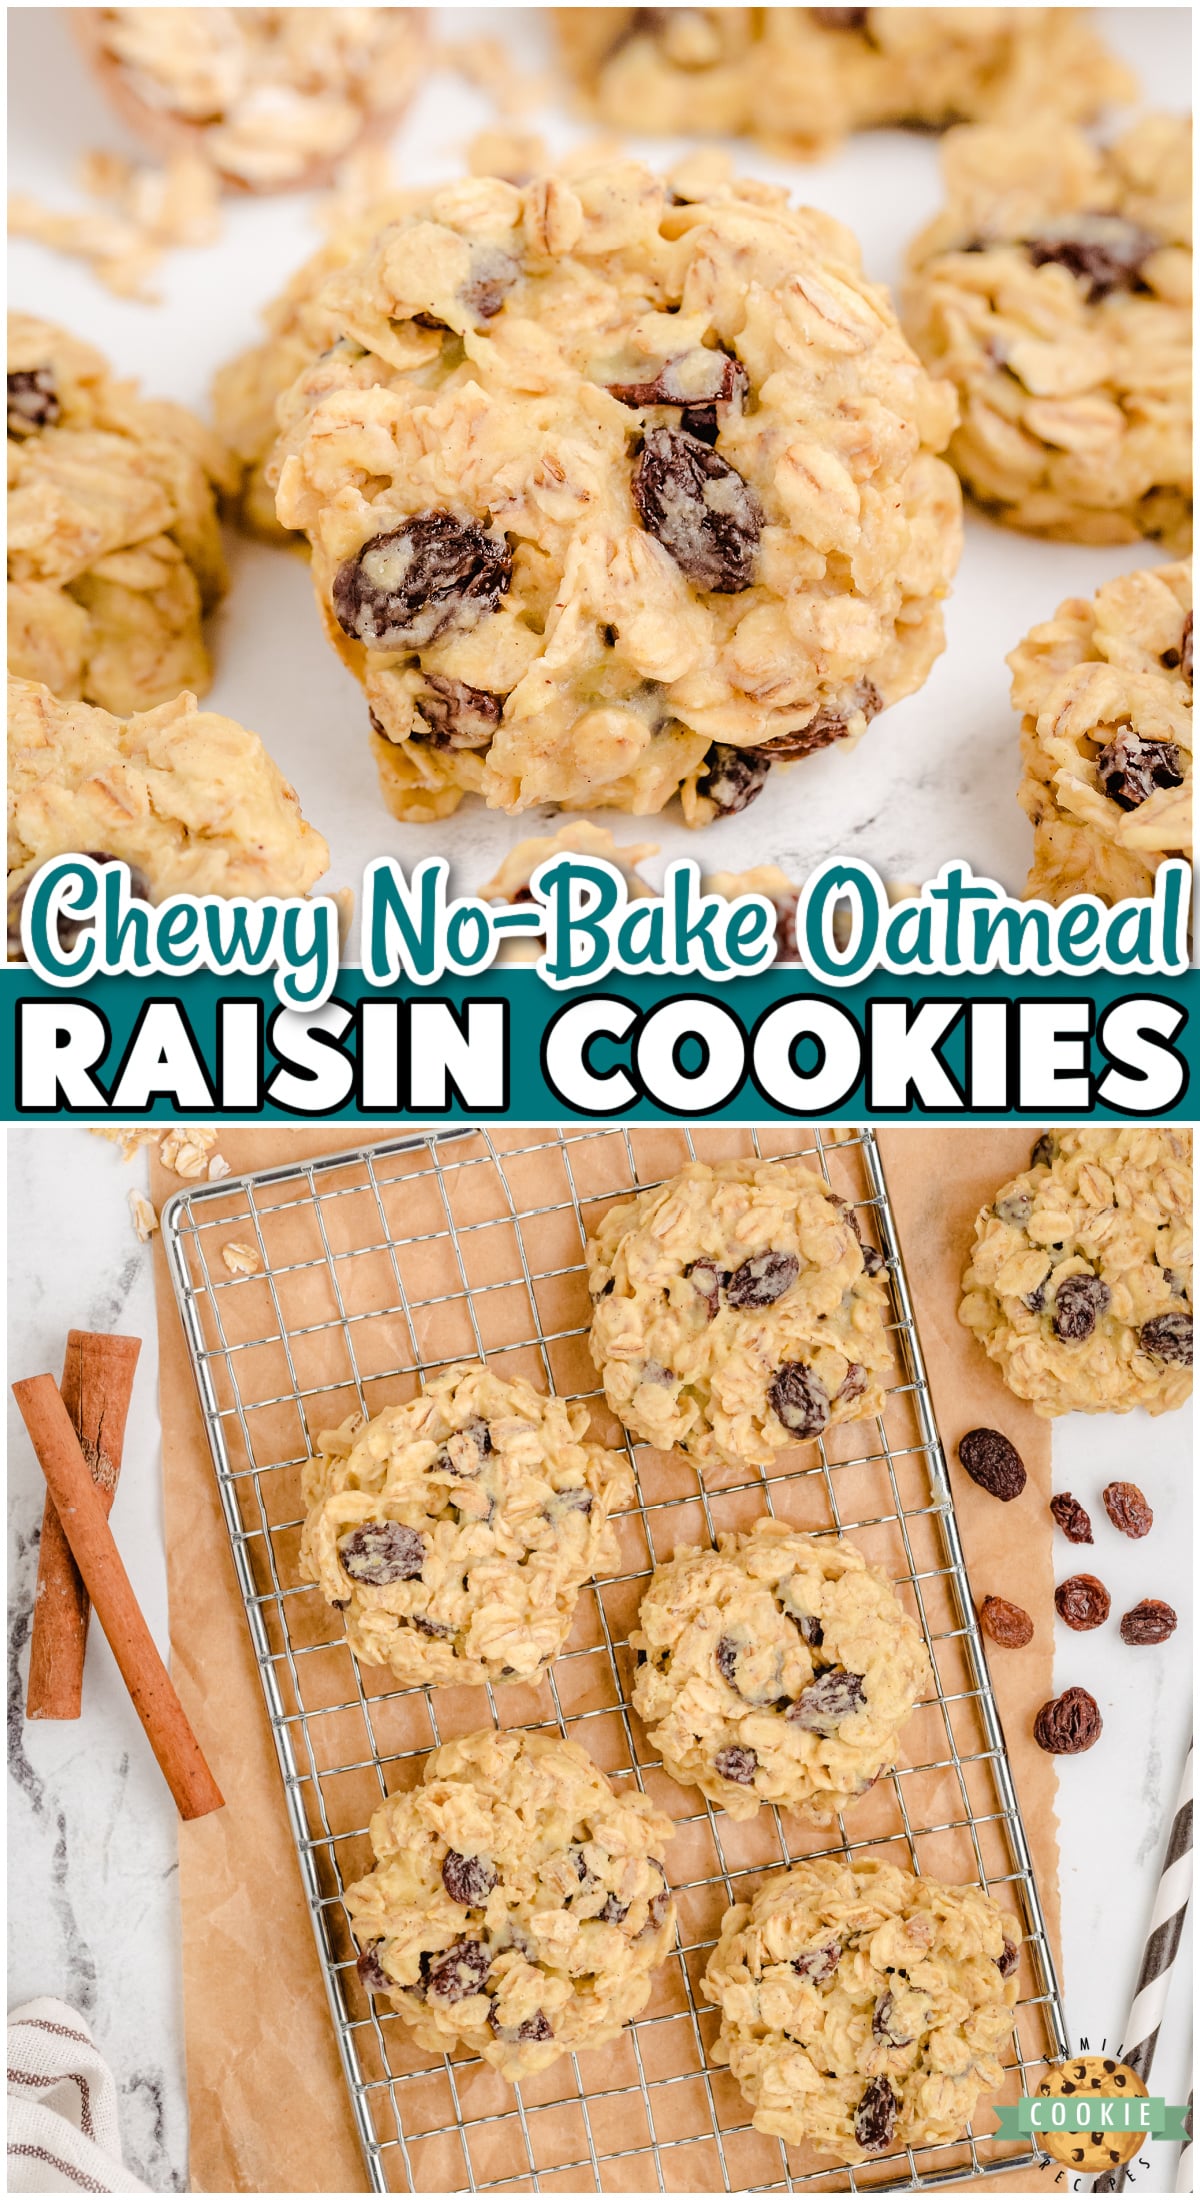 No Bake Oatmeal Raisin Cookies are a fantastic twist on a classic! Delightful no-bake pudding cookies with warm spices, oats & raisins.